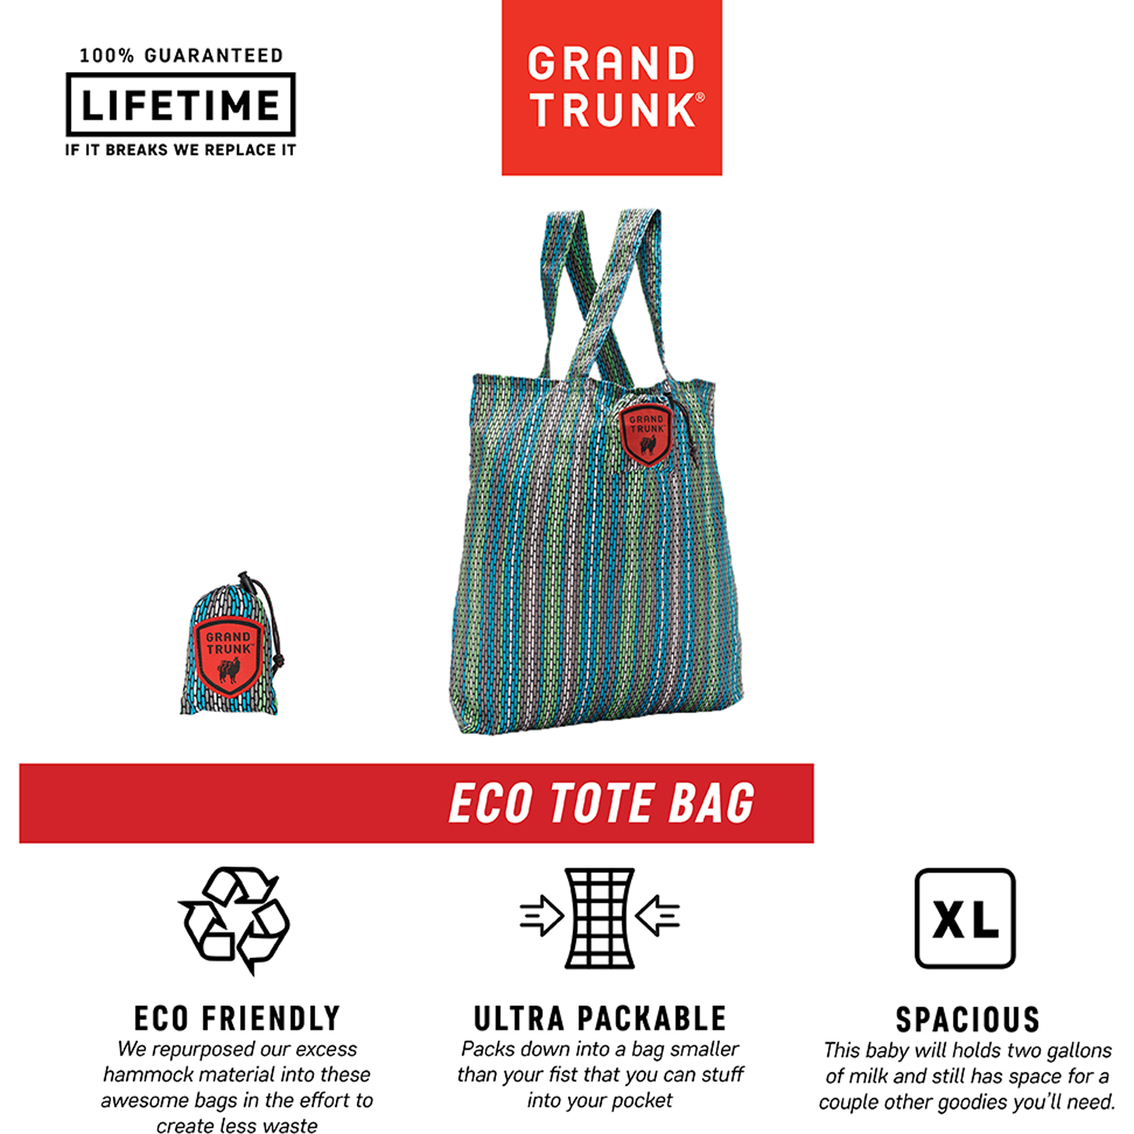 Grand Trunk Eco Tote Bag - Image 2 of 3